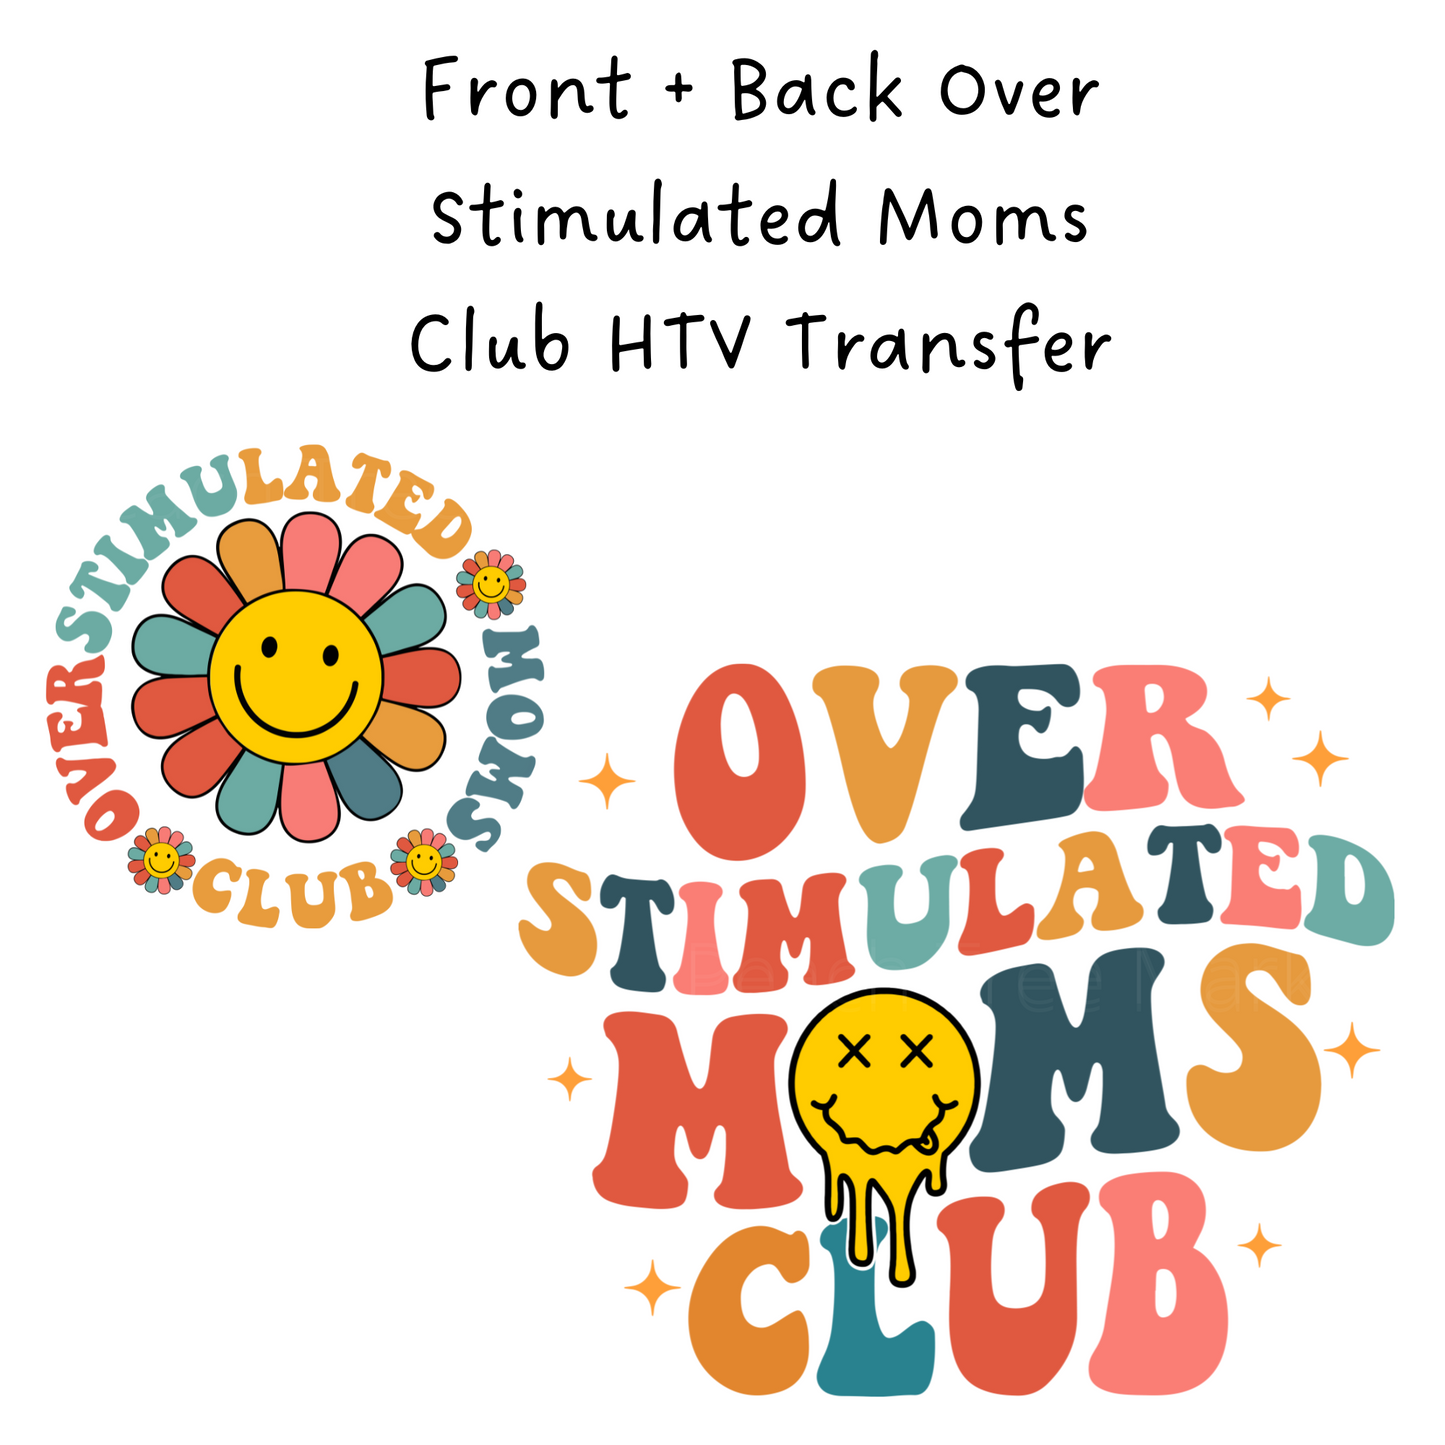 Overstimulated Moms Club Front + Back HTV Transfer